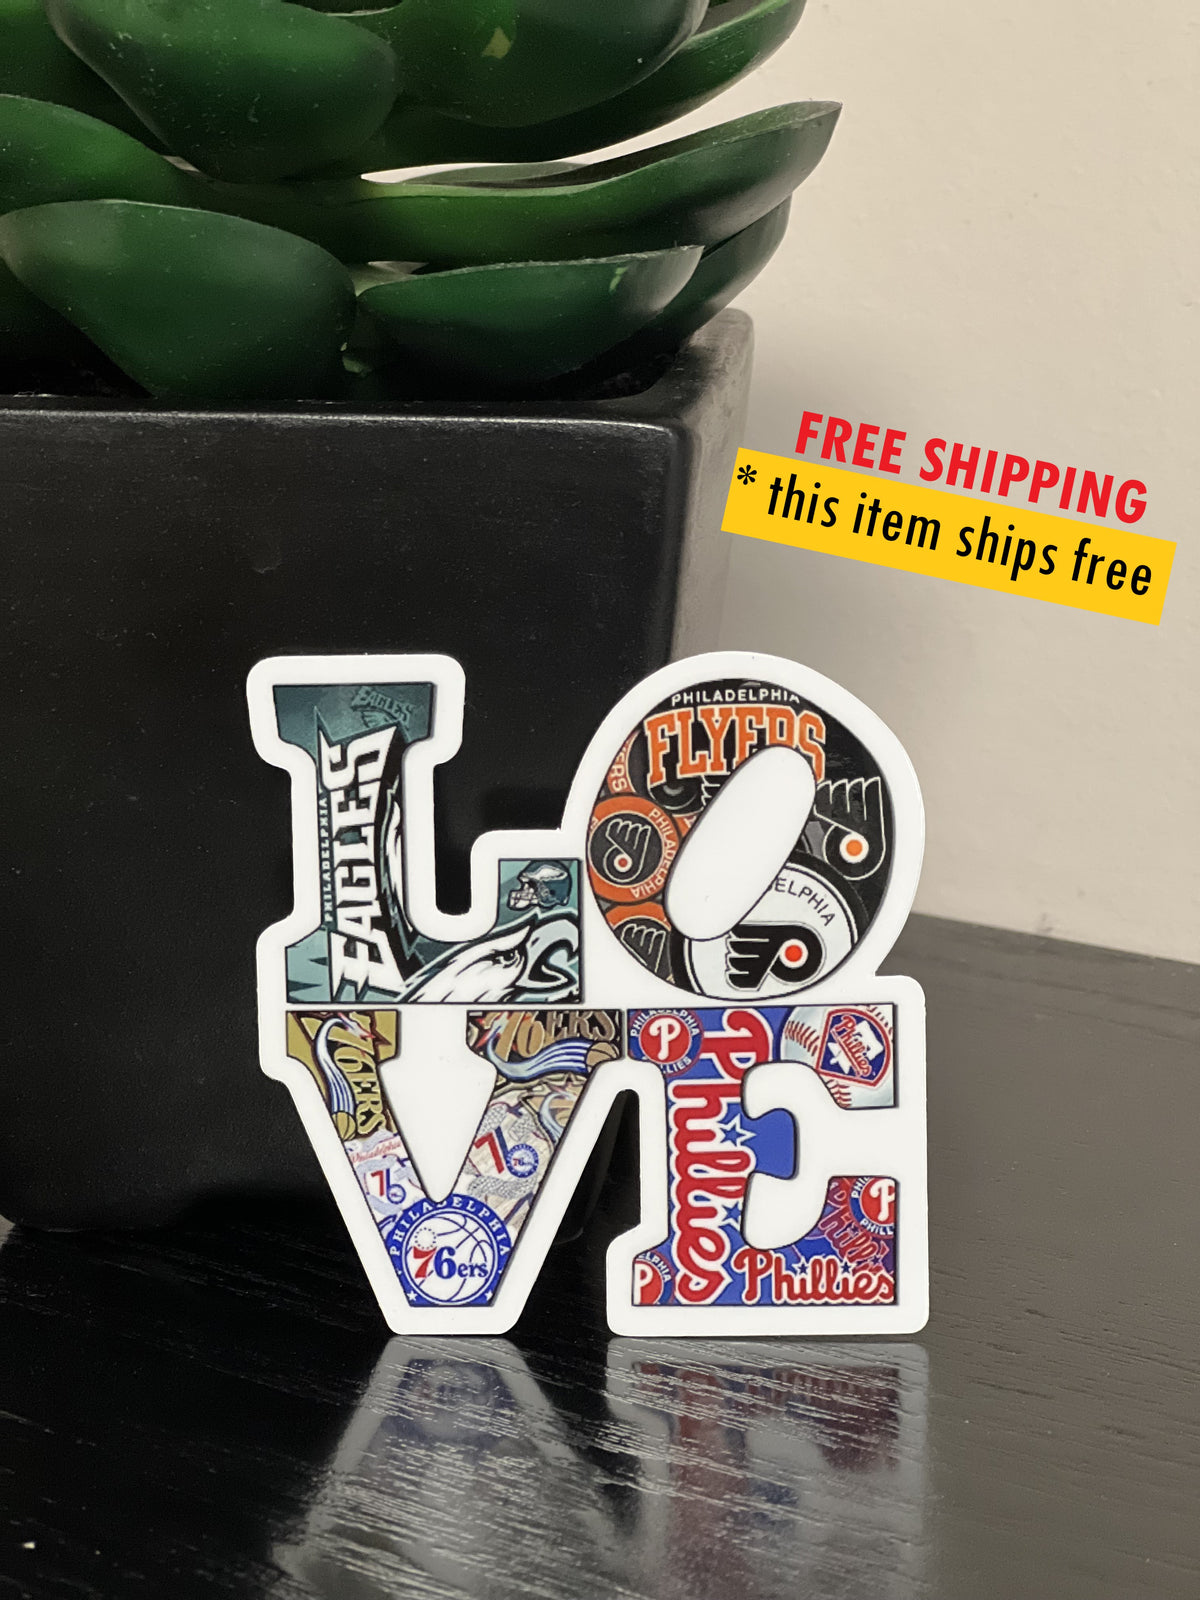 Philadelphia LOVE Sports Magnet: Eagles Football, Flyers Hockets, 76ers Basketball, Phillies Baseball. Unique Father's Day gift or birthday Dad, Son, Uncle, Nephew, Grandfather (Grandad/Grandpa/PopPop), Boss, Employee, Neighbor, Friend